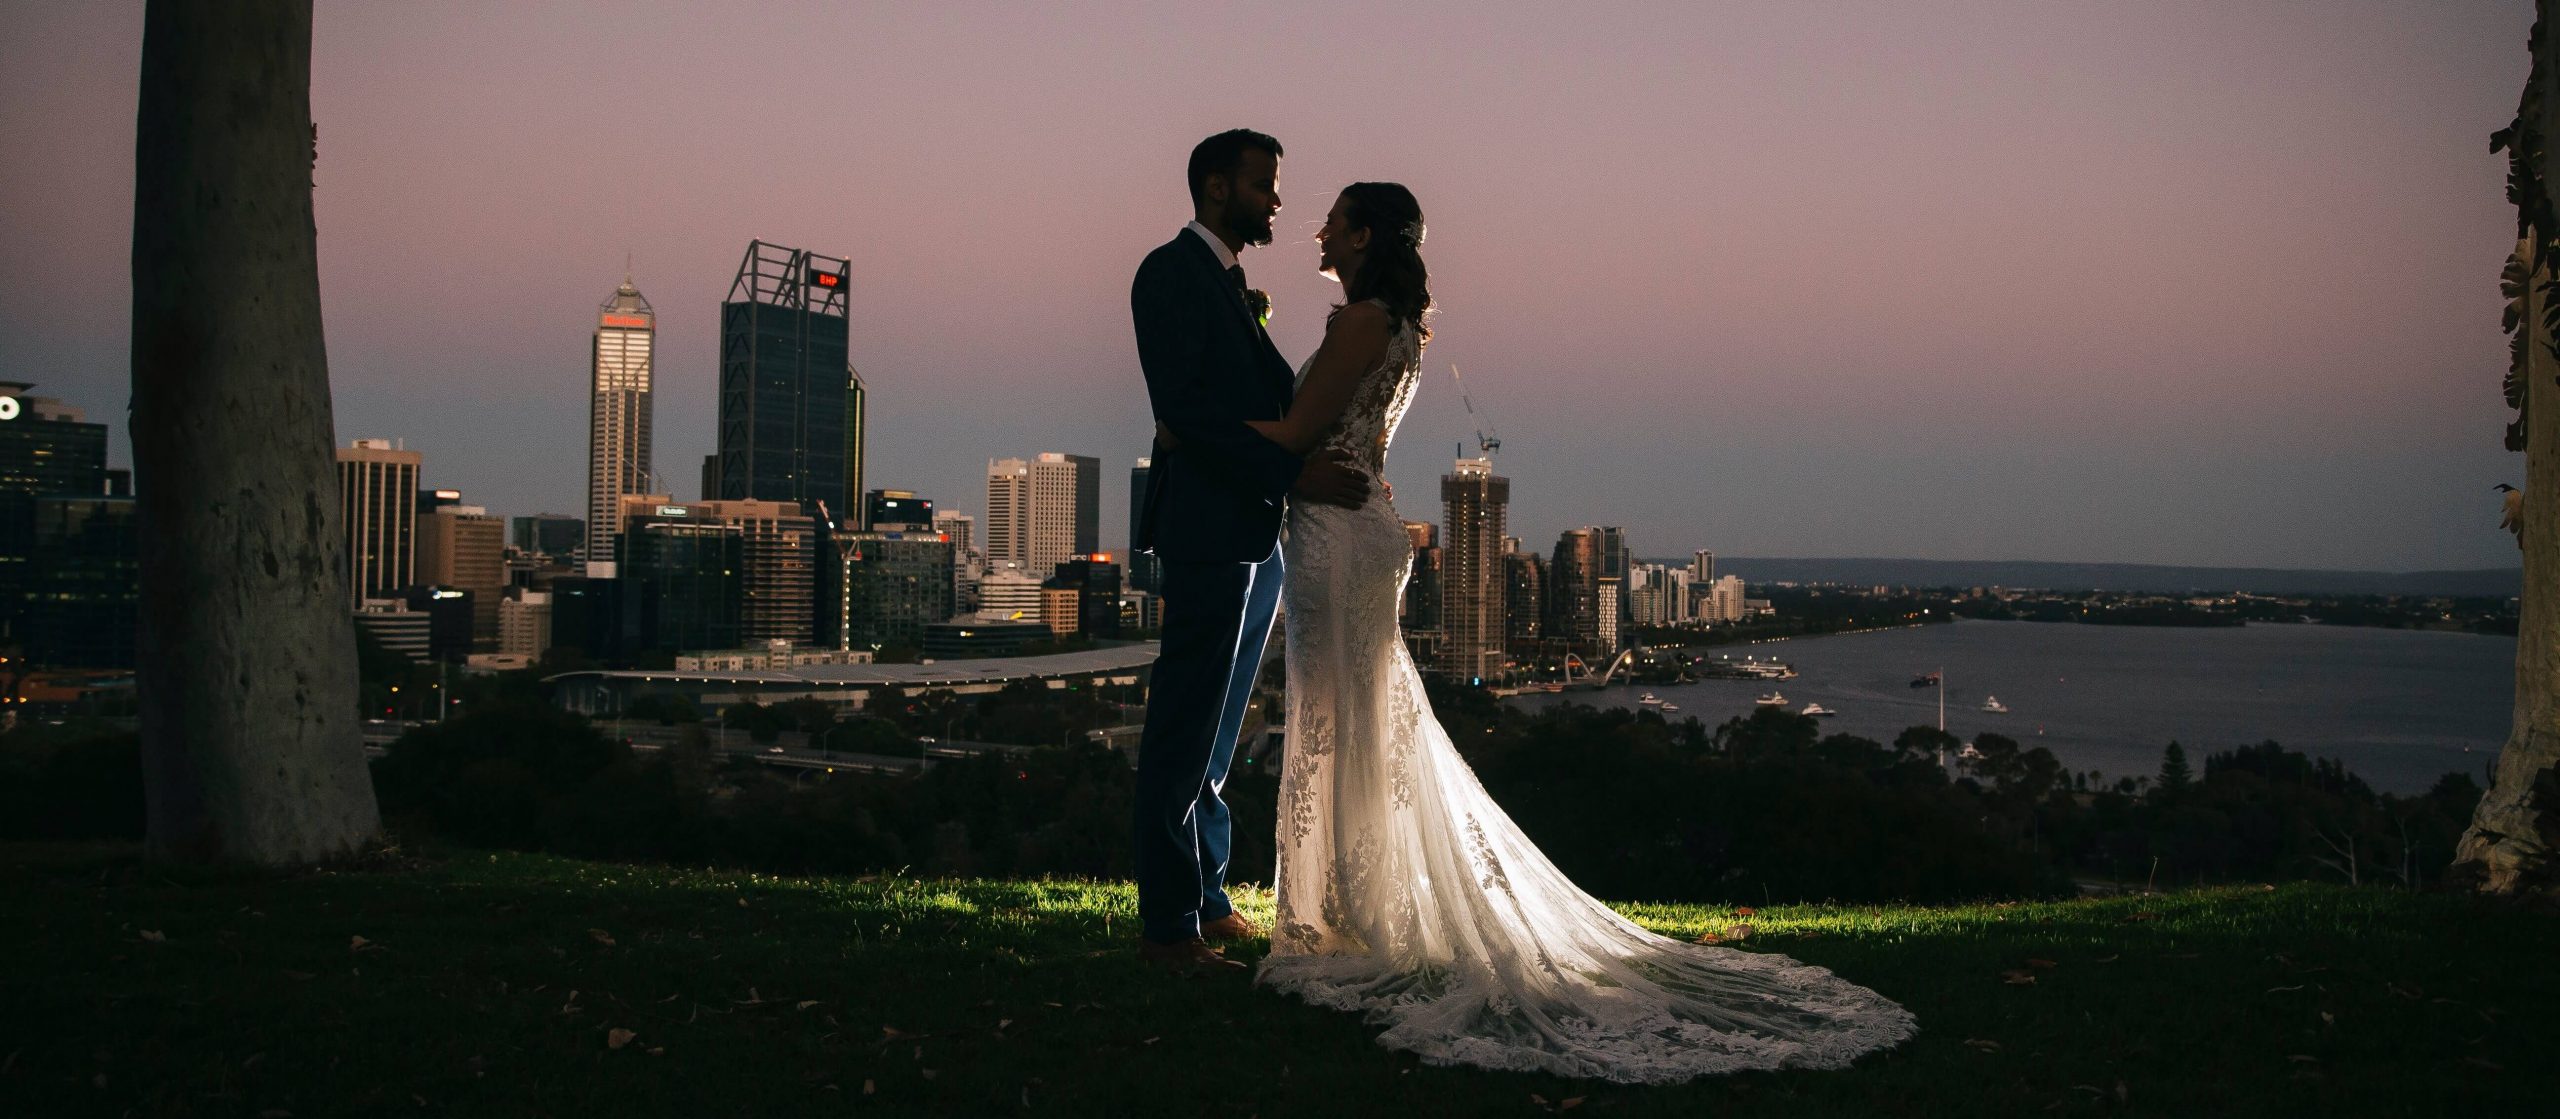 Perth at Night – Jacqueline Jane Photography – Eloping with Marriage Celebrant Perth